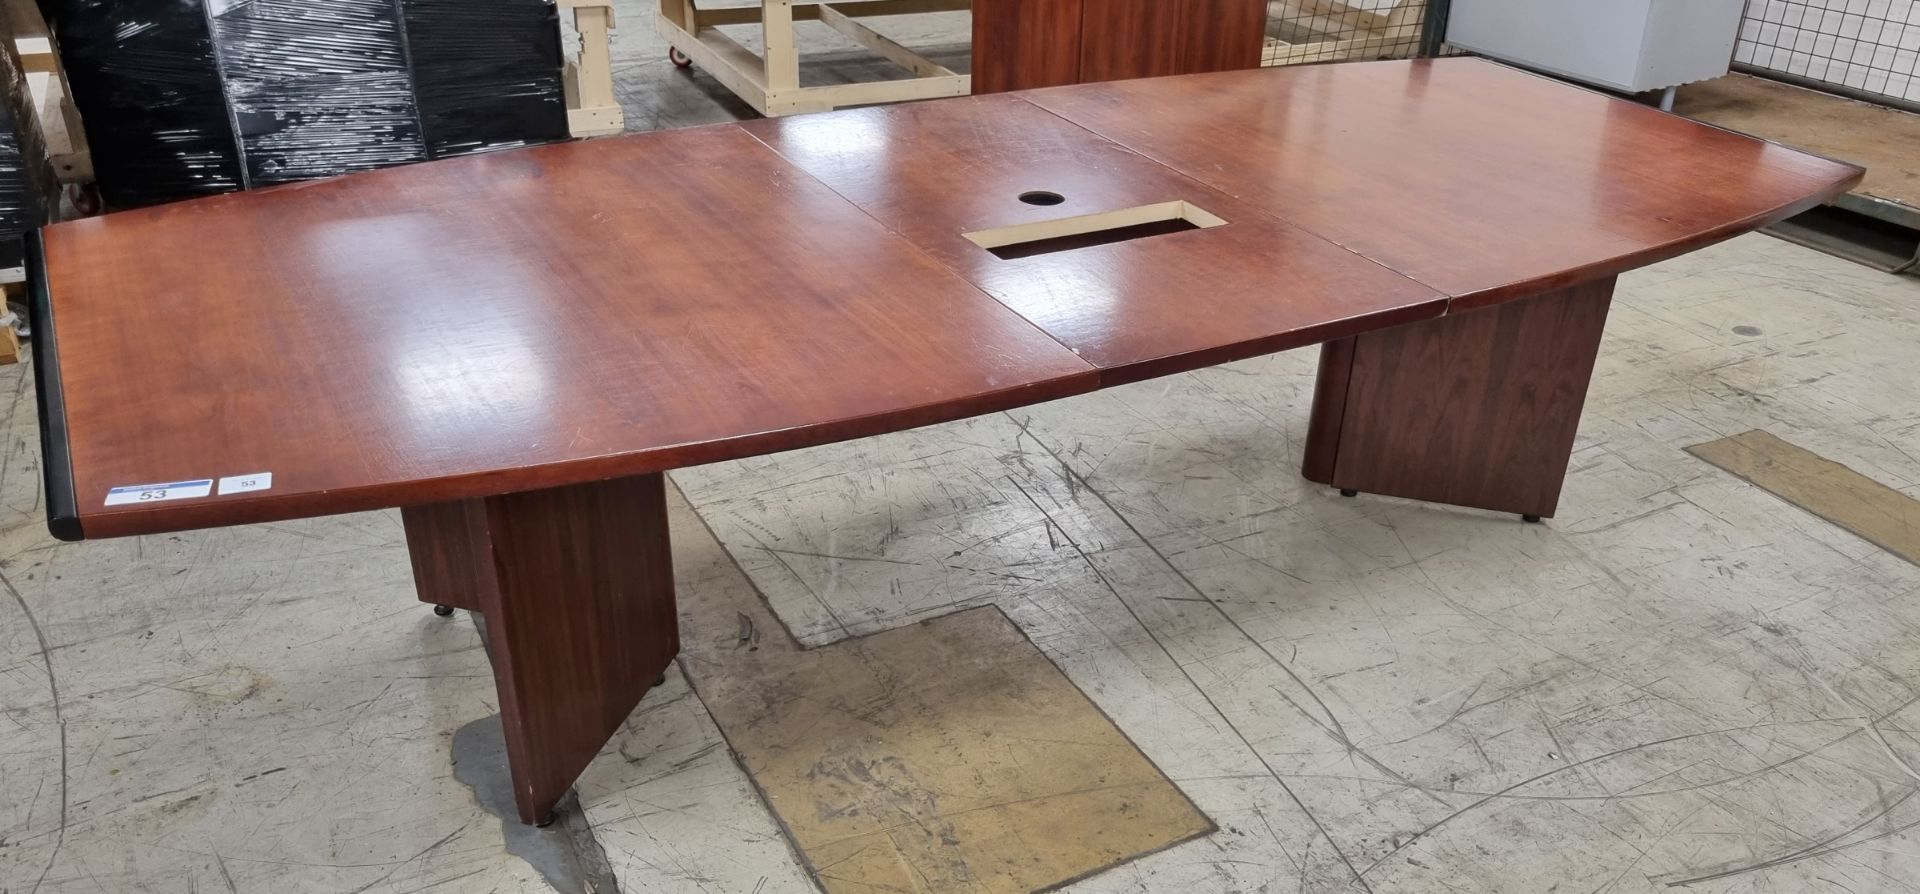 Rosewood 3 part sectional boardroom table on pedestal - L 2900 x W 1300mm - Image 10 of 15